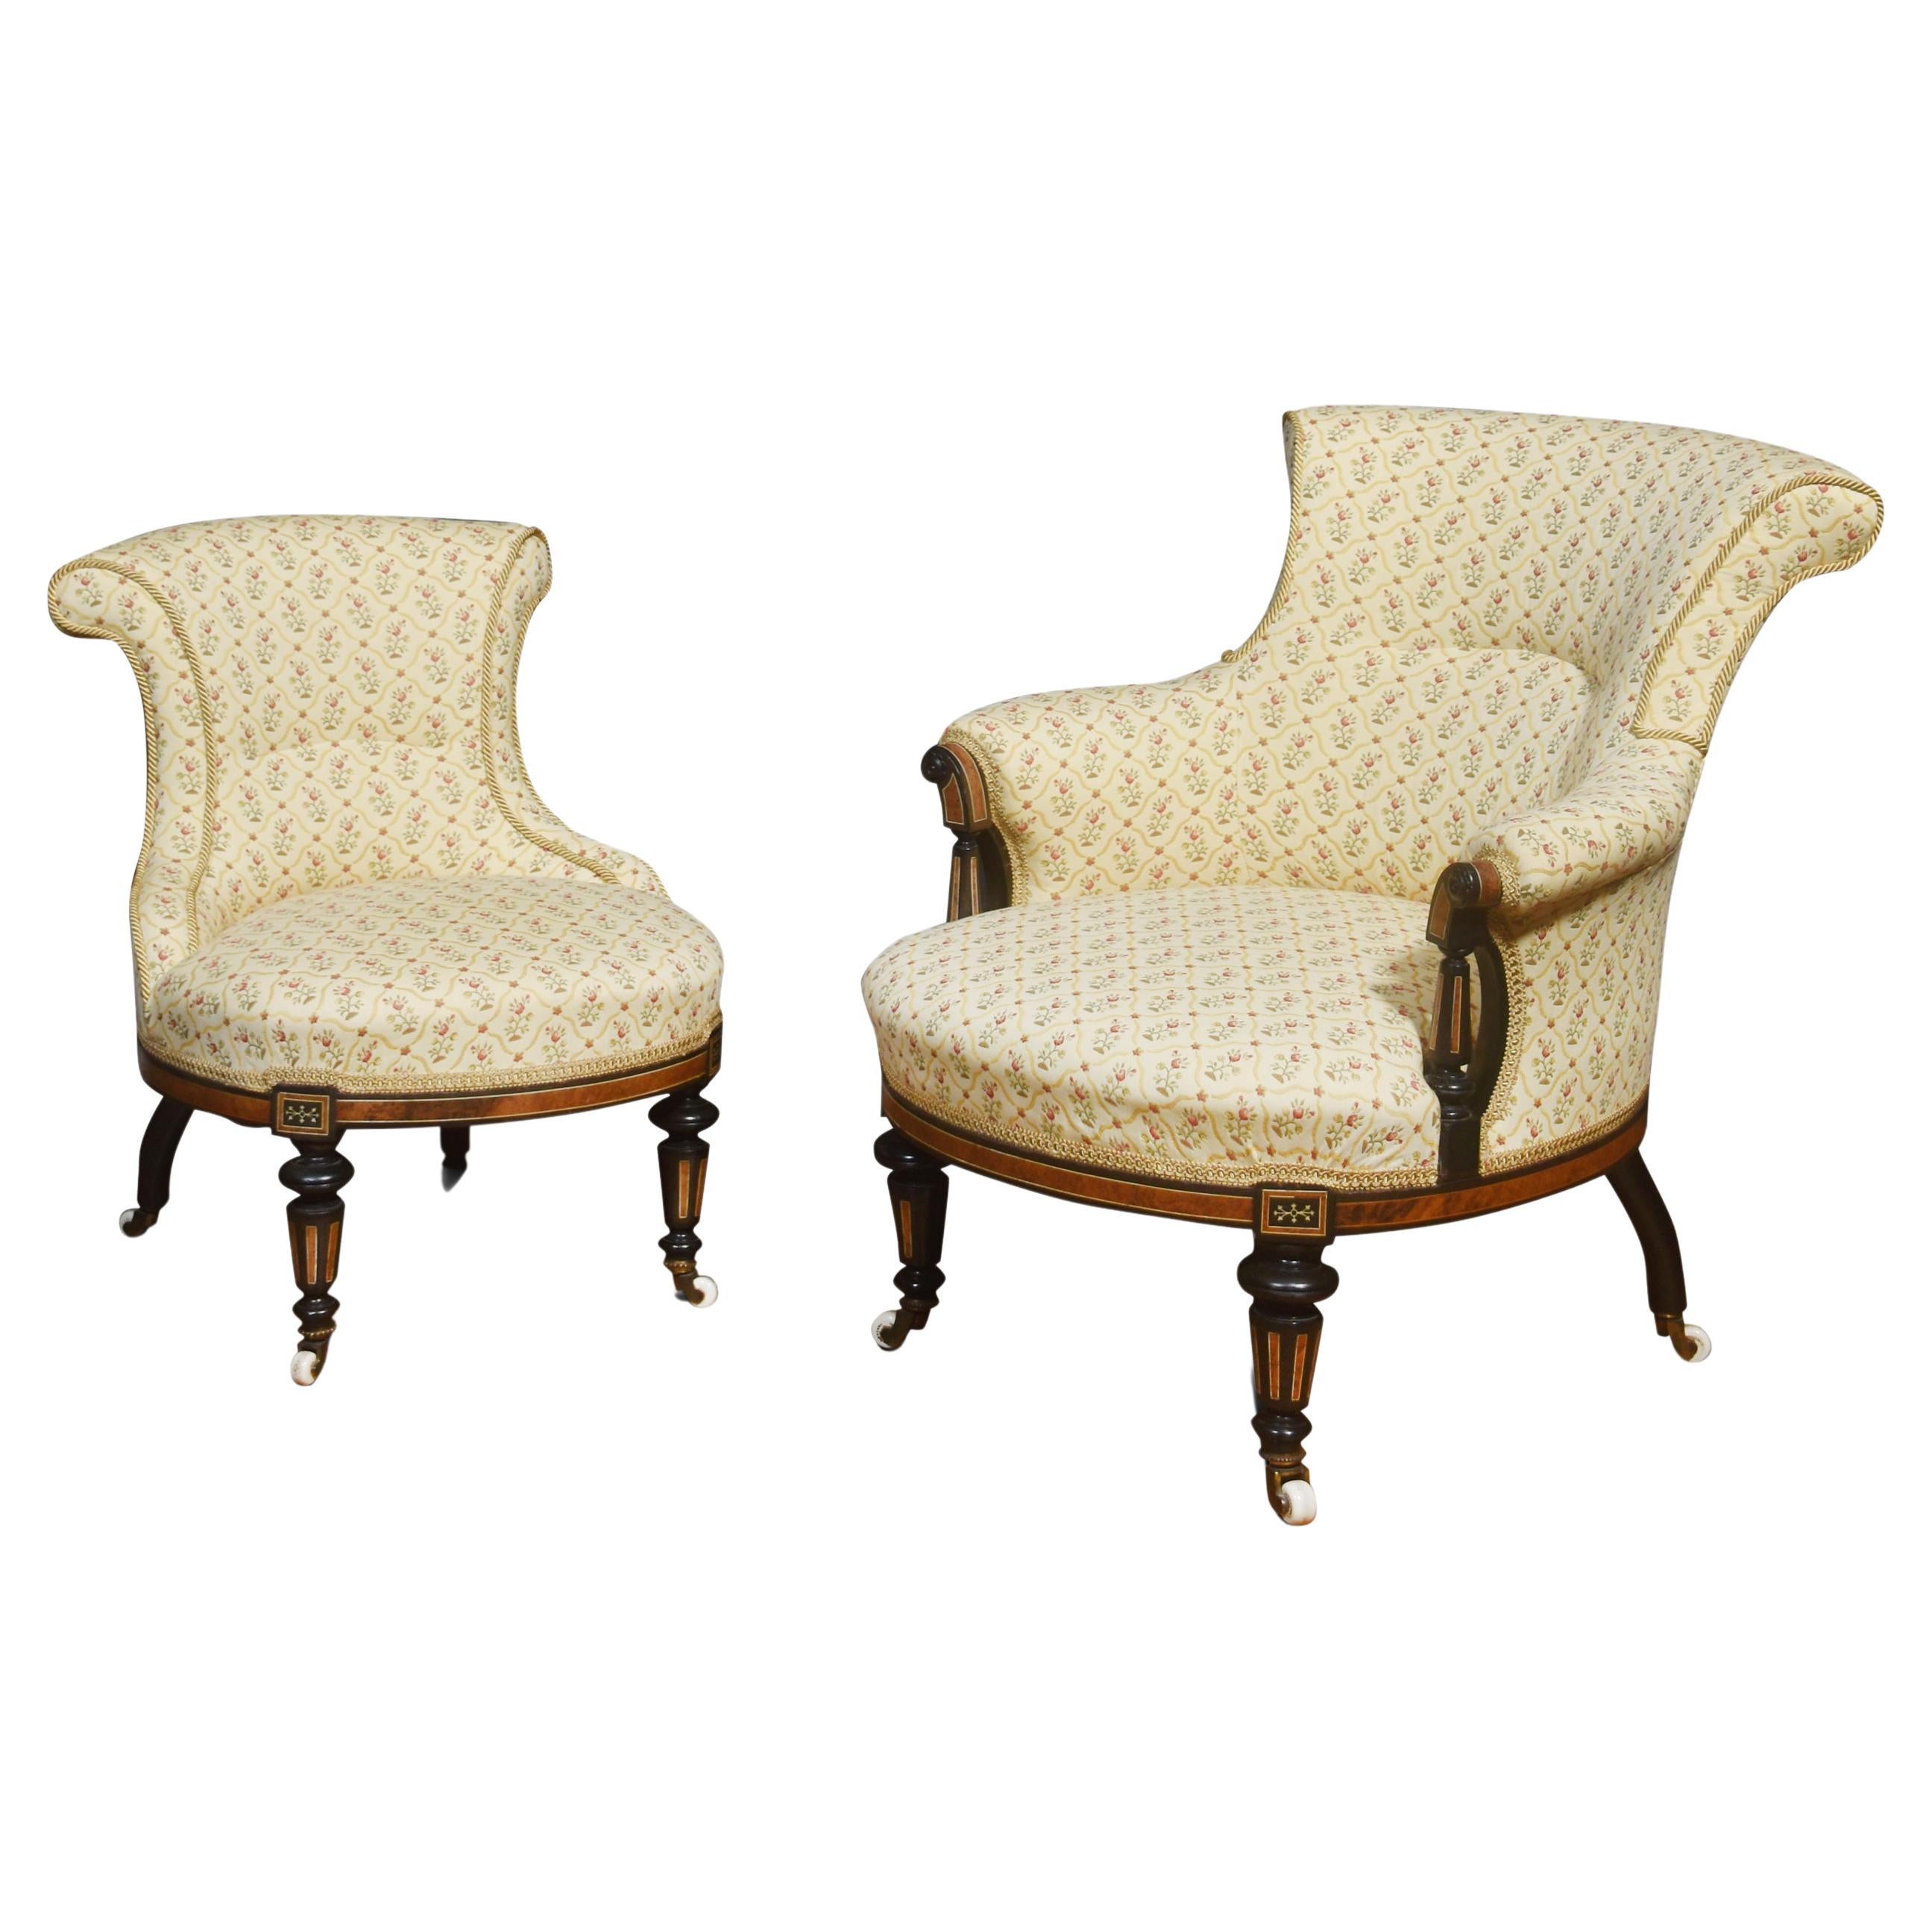 Set of two bedroom chairs For Sale